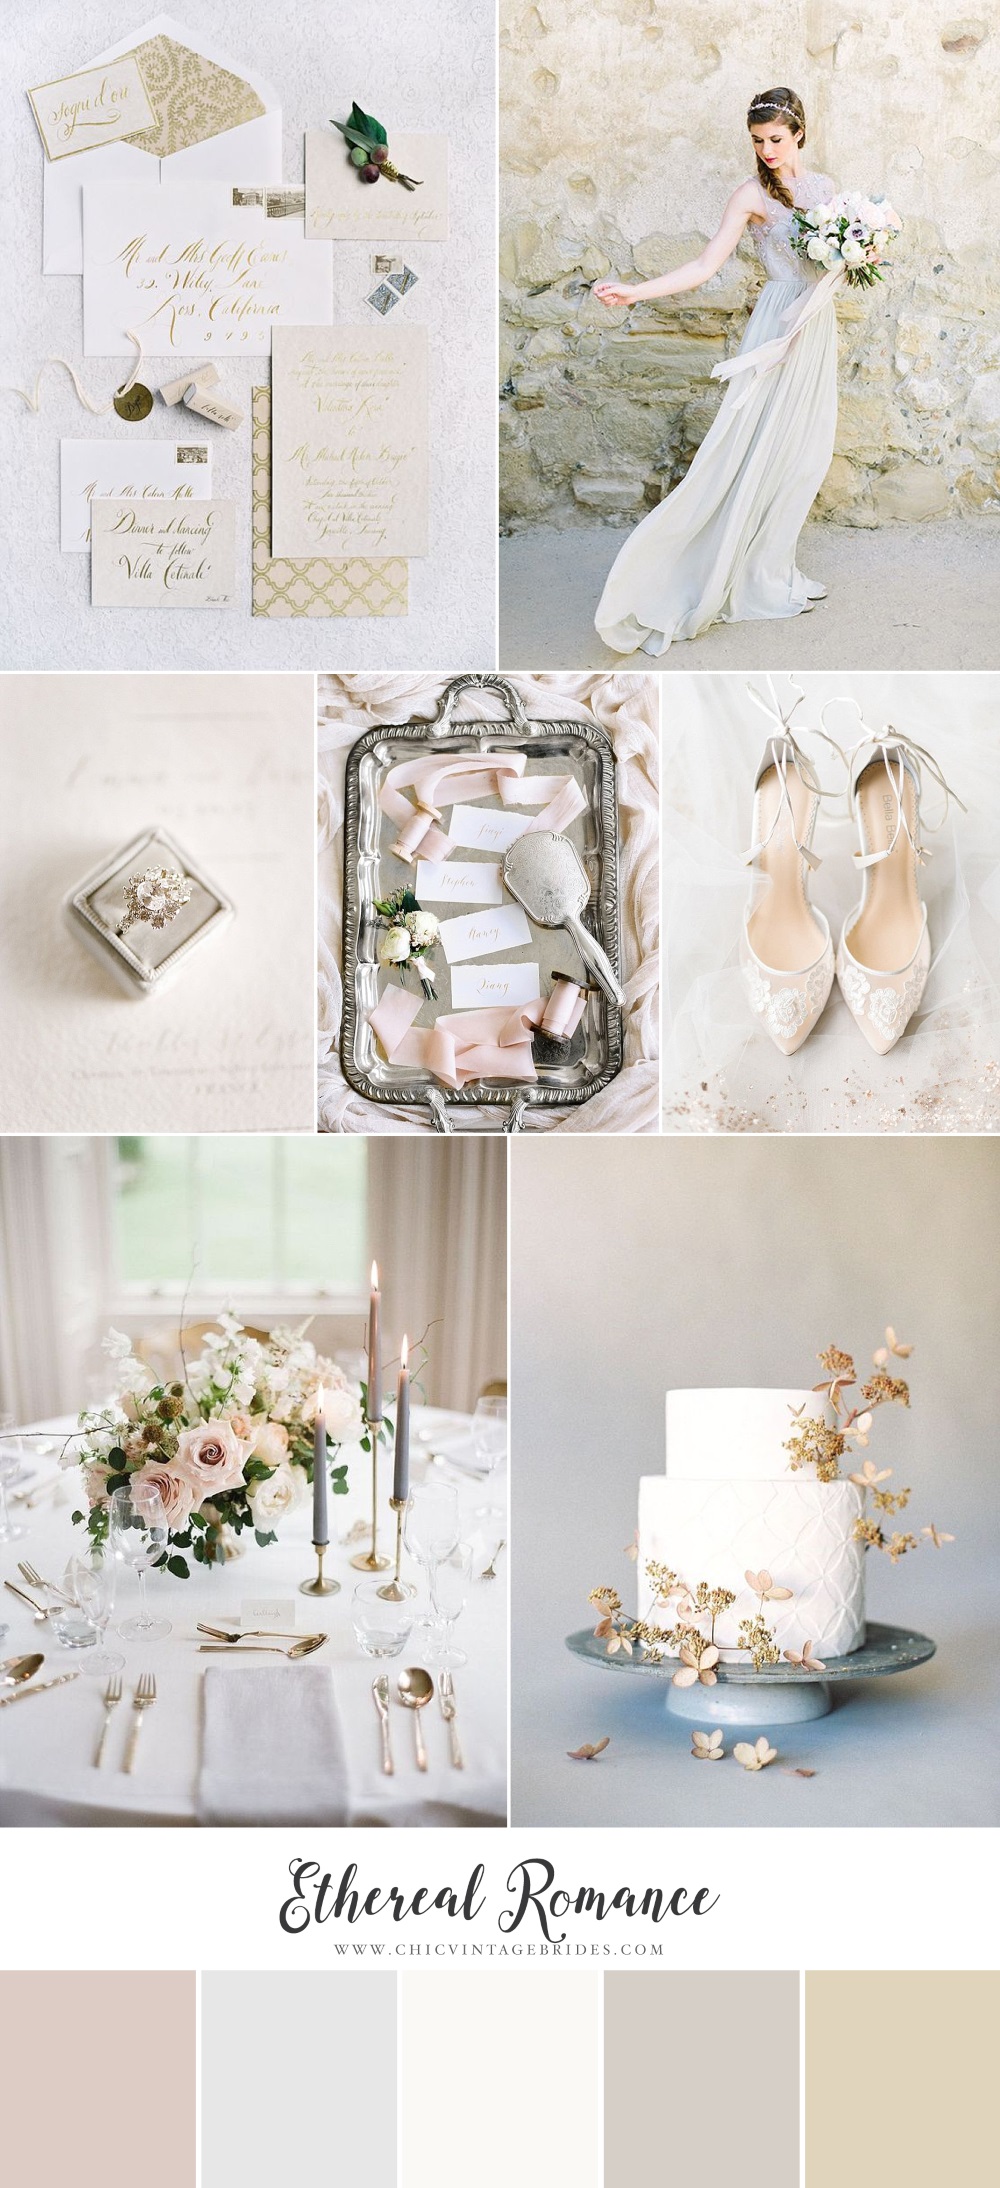 Ethereal Romance - Breathtakingly Romantic Wedding Inspiration in the Softest Shades